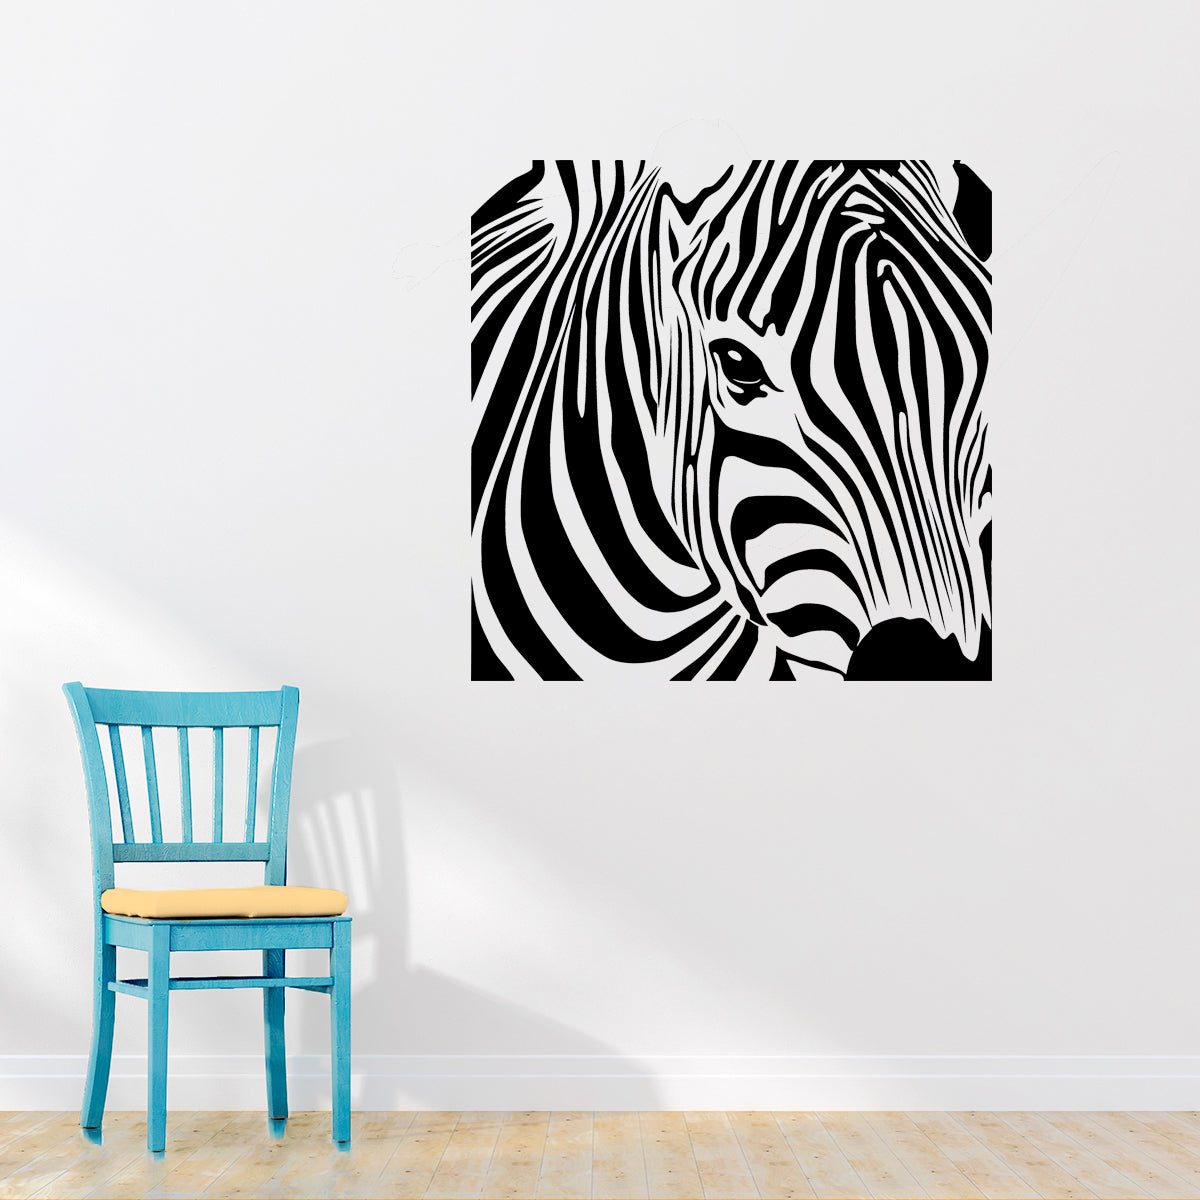 Zebra face | Wall decal - Adnil Creations